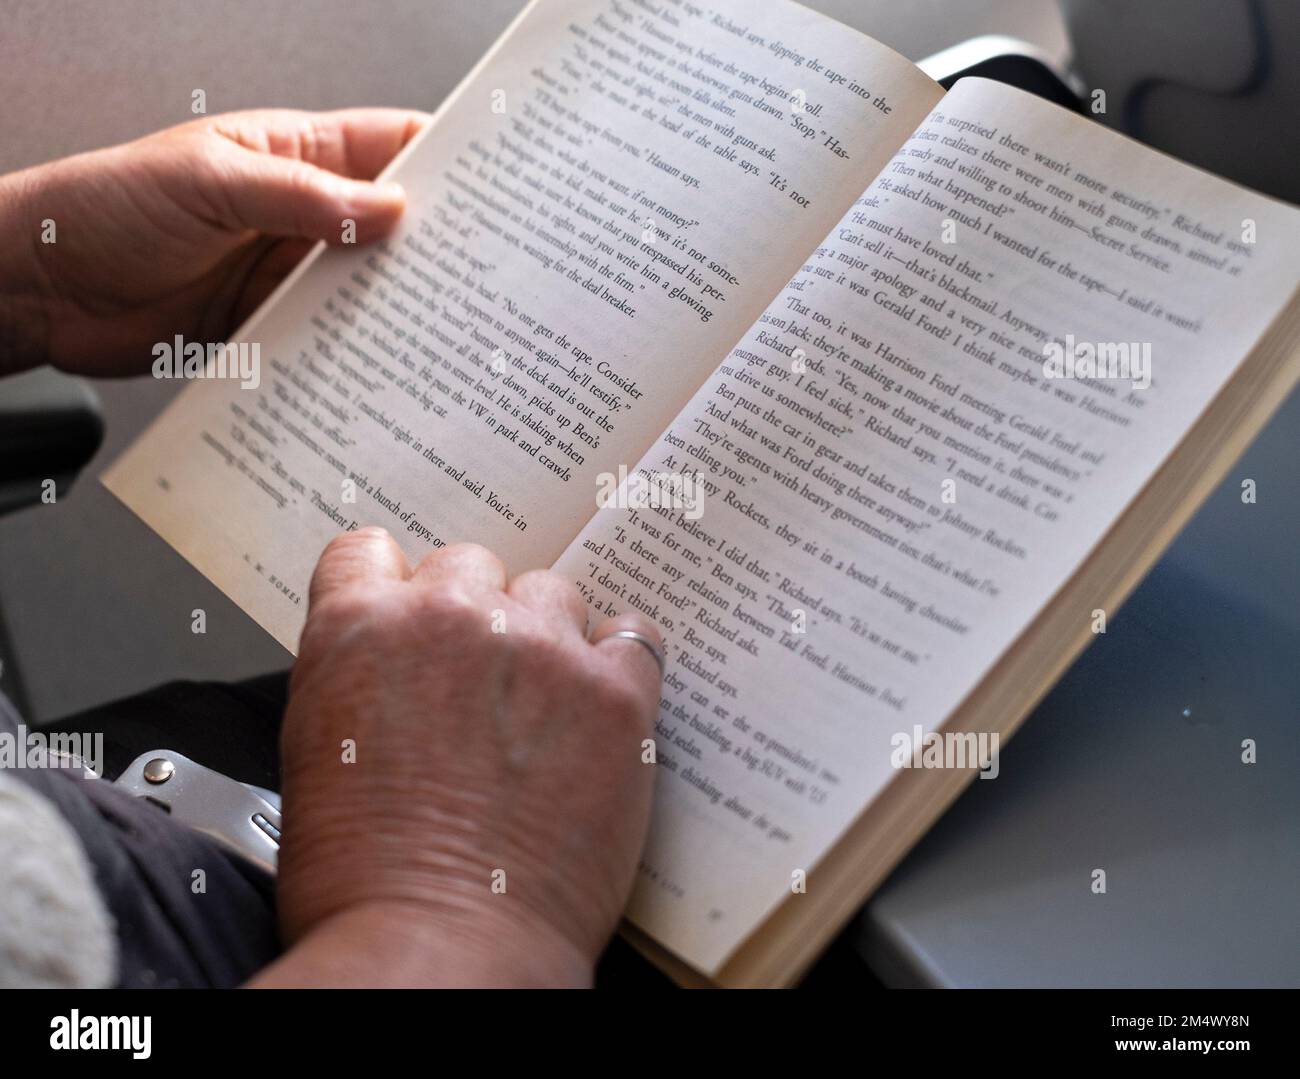 A woman reads a book while on an airplane. Stock Photo